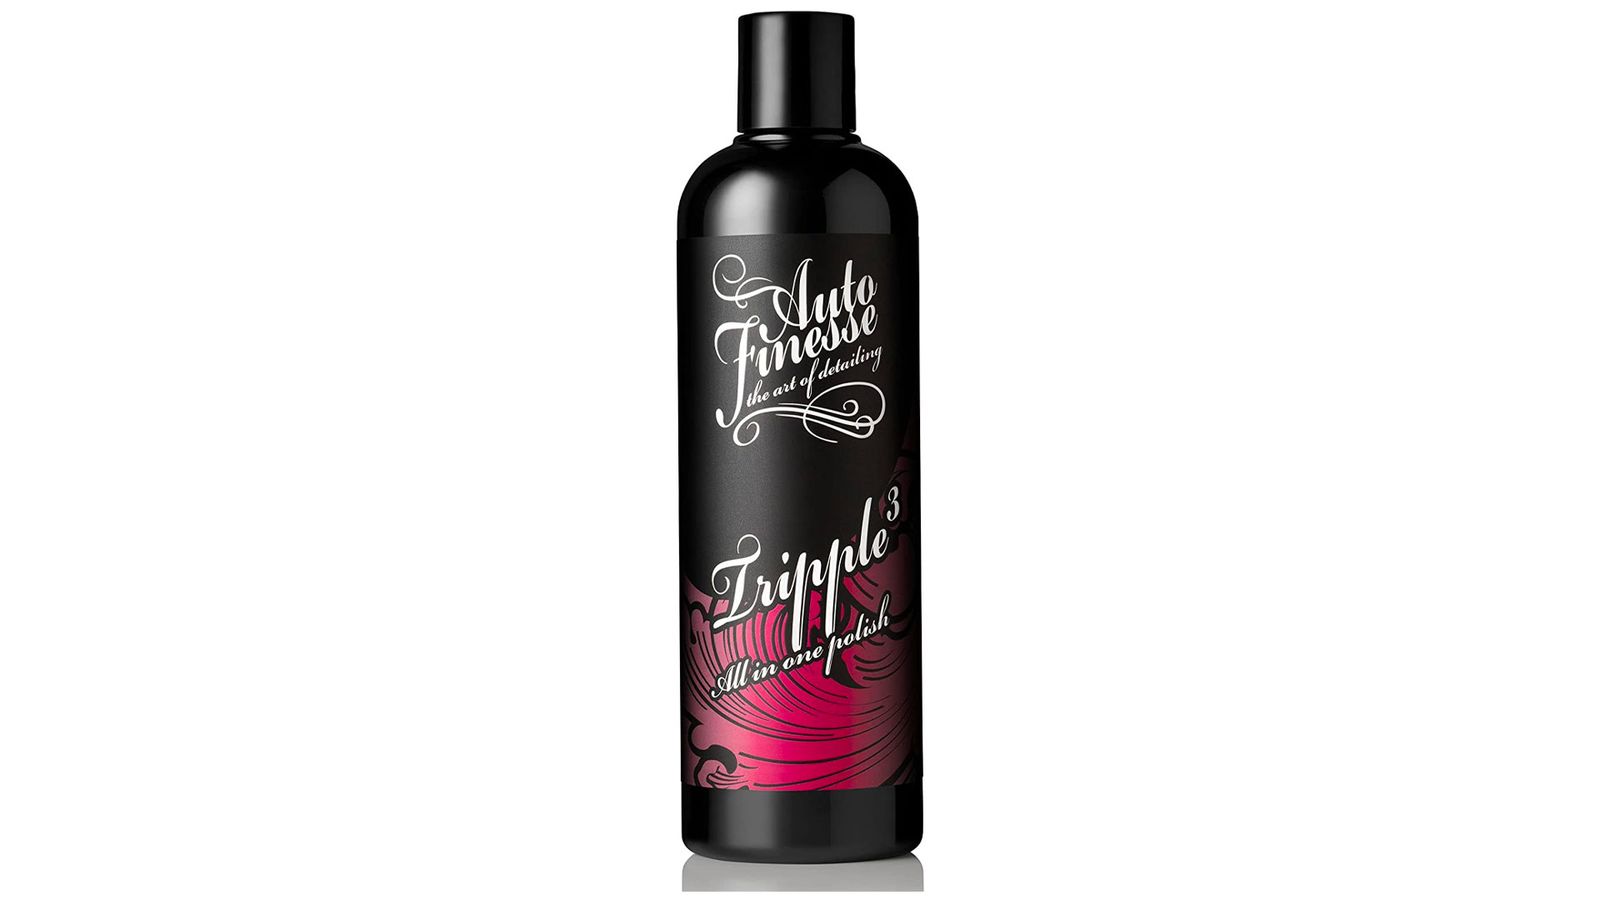 Auto Finesse Tripple All In One Polish product image of a black bottle with a pink and silver label.